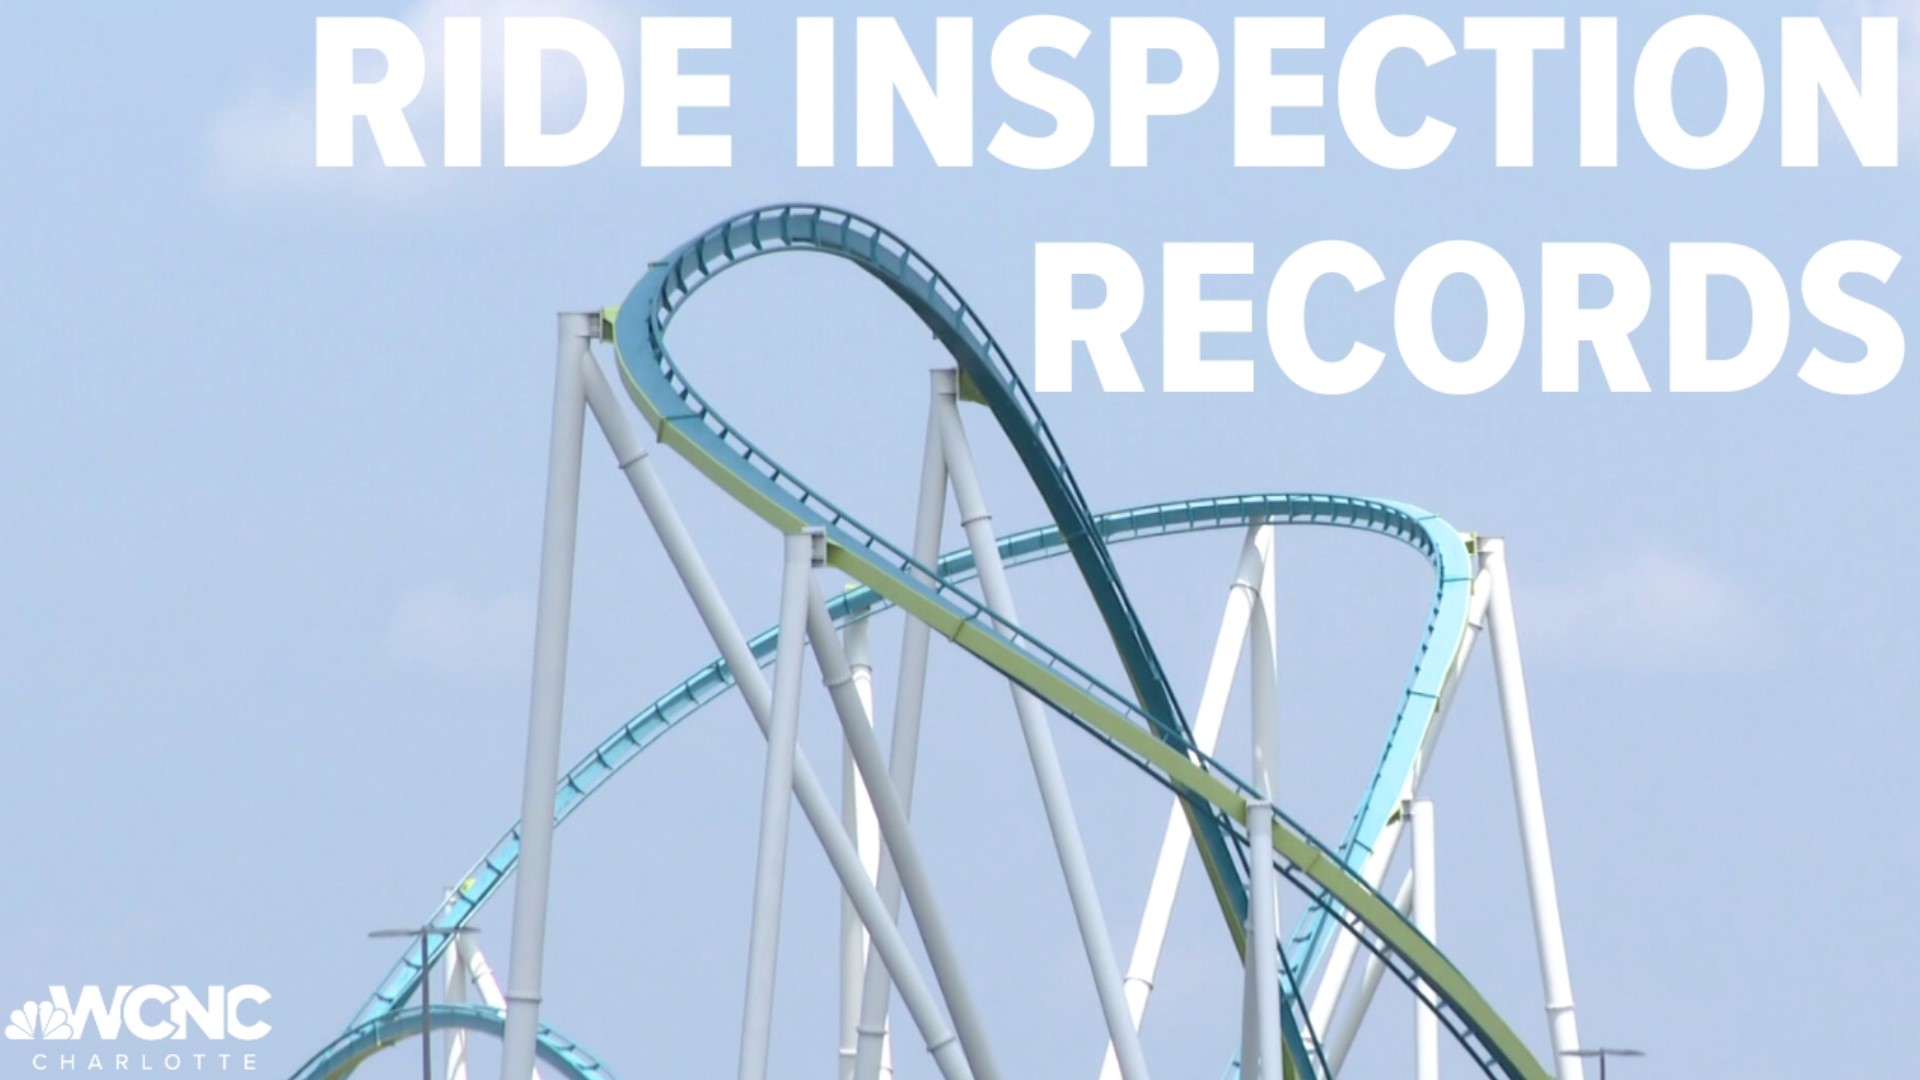 We're getting a closer look at inspection records of rollercoasters at Carowinds over the past four years.